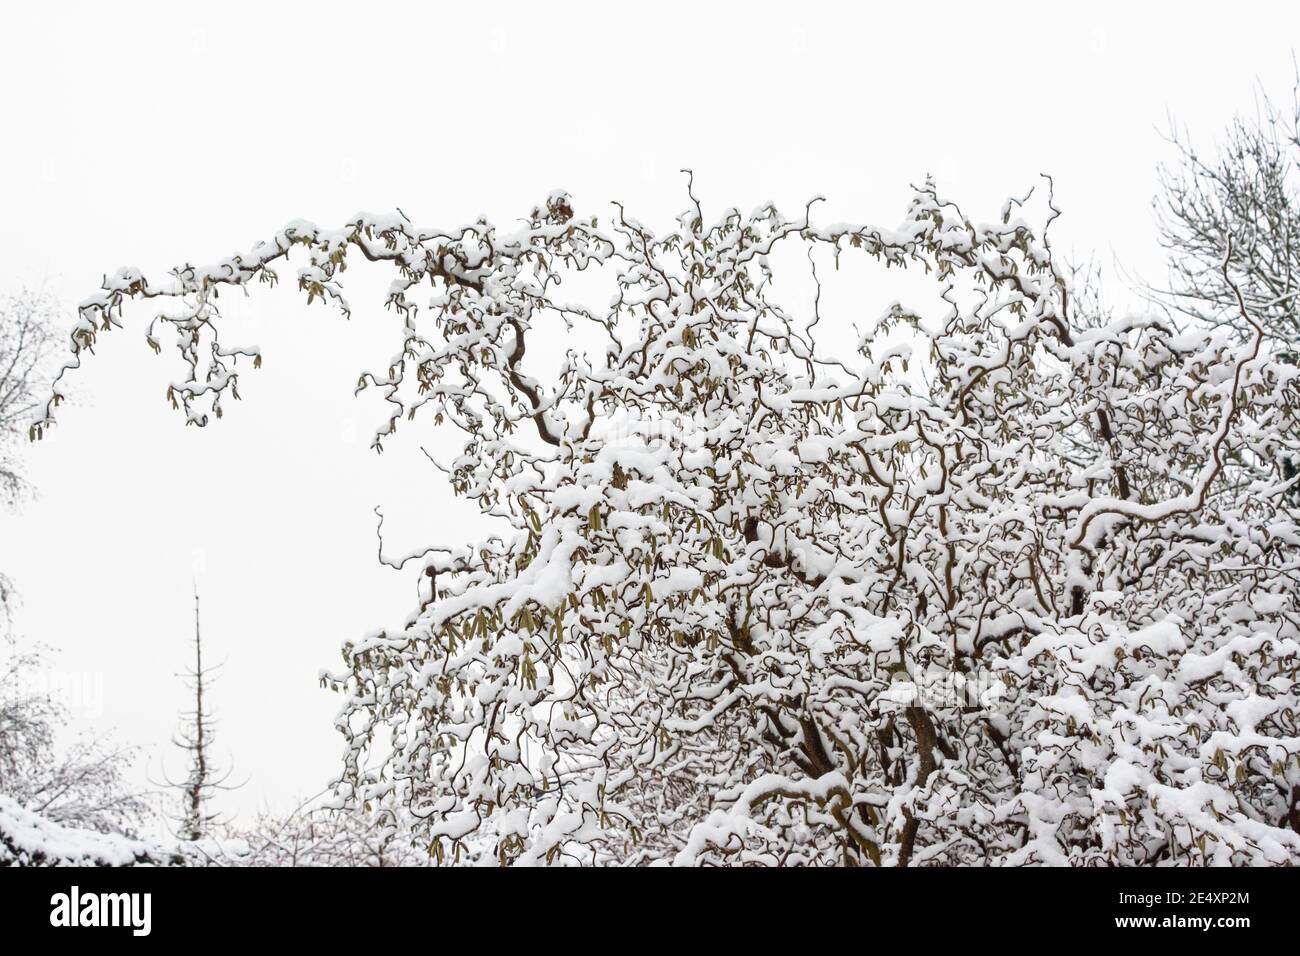 The branches of a corkscrew hazel(Corylus avellana 'Contorta') covered in snow Stock Photo